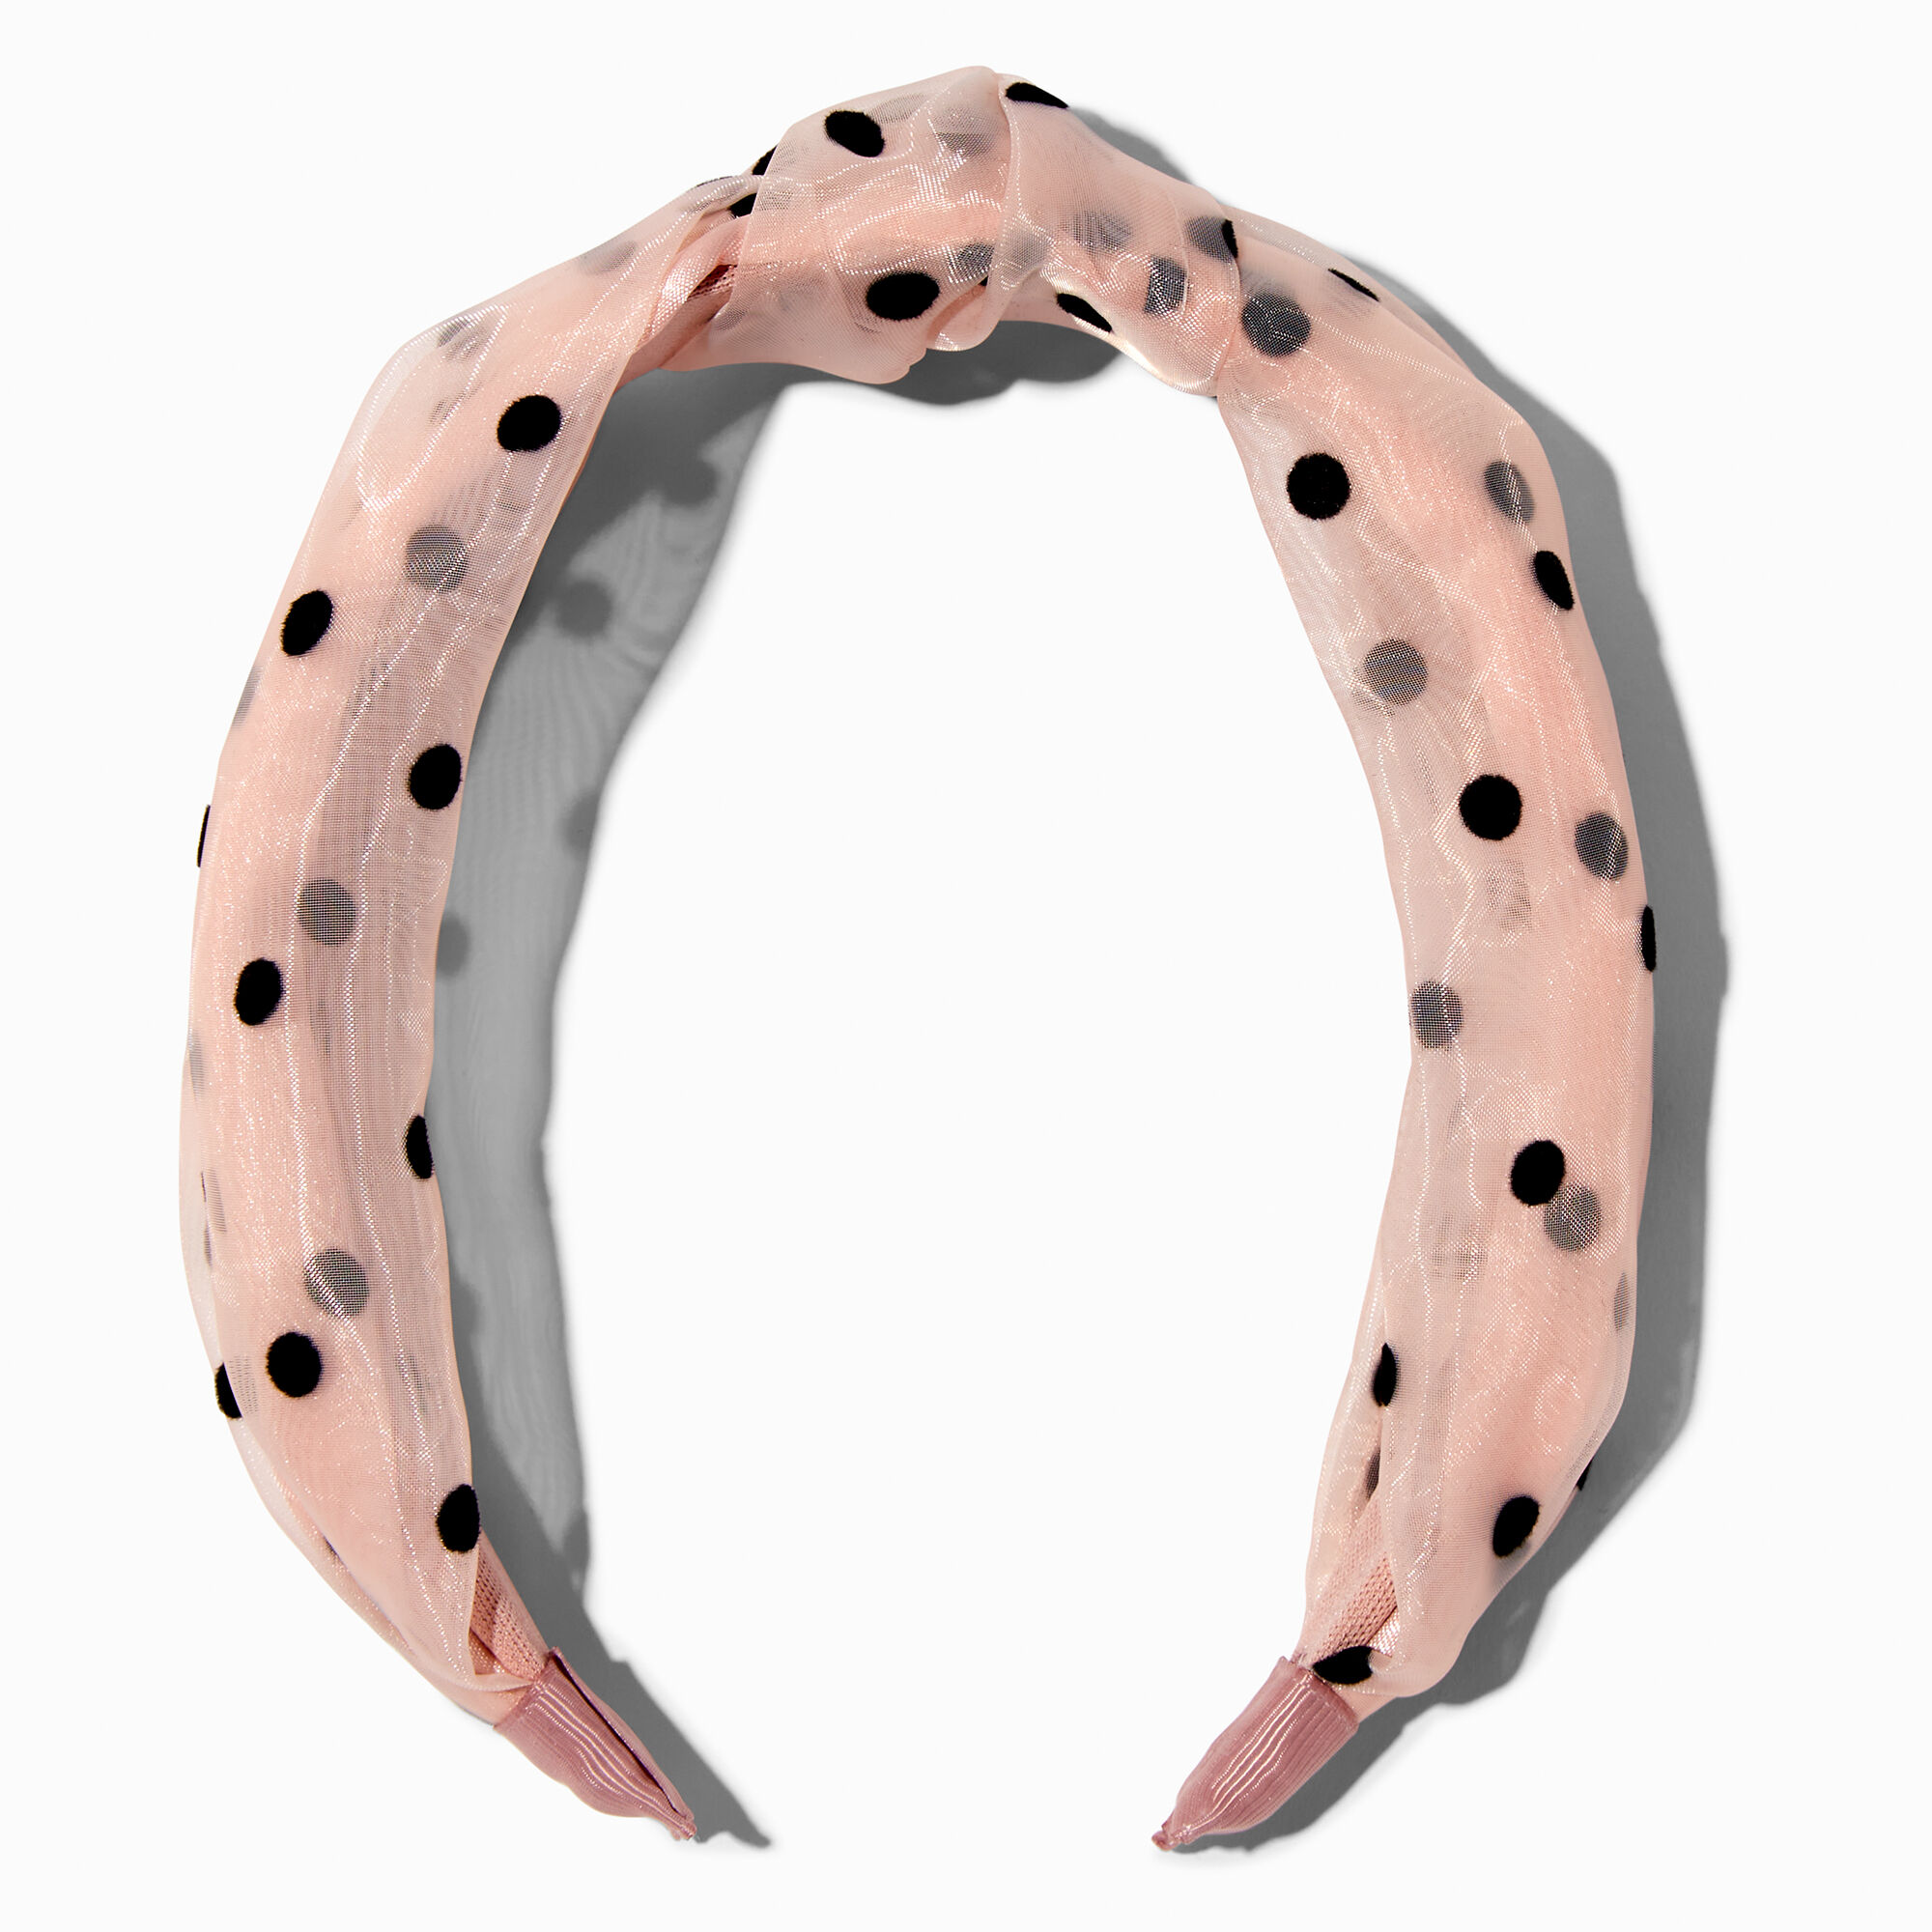 View Claires Blush Polka Dot Sheer Knotted Headband Pink information